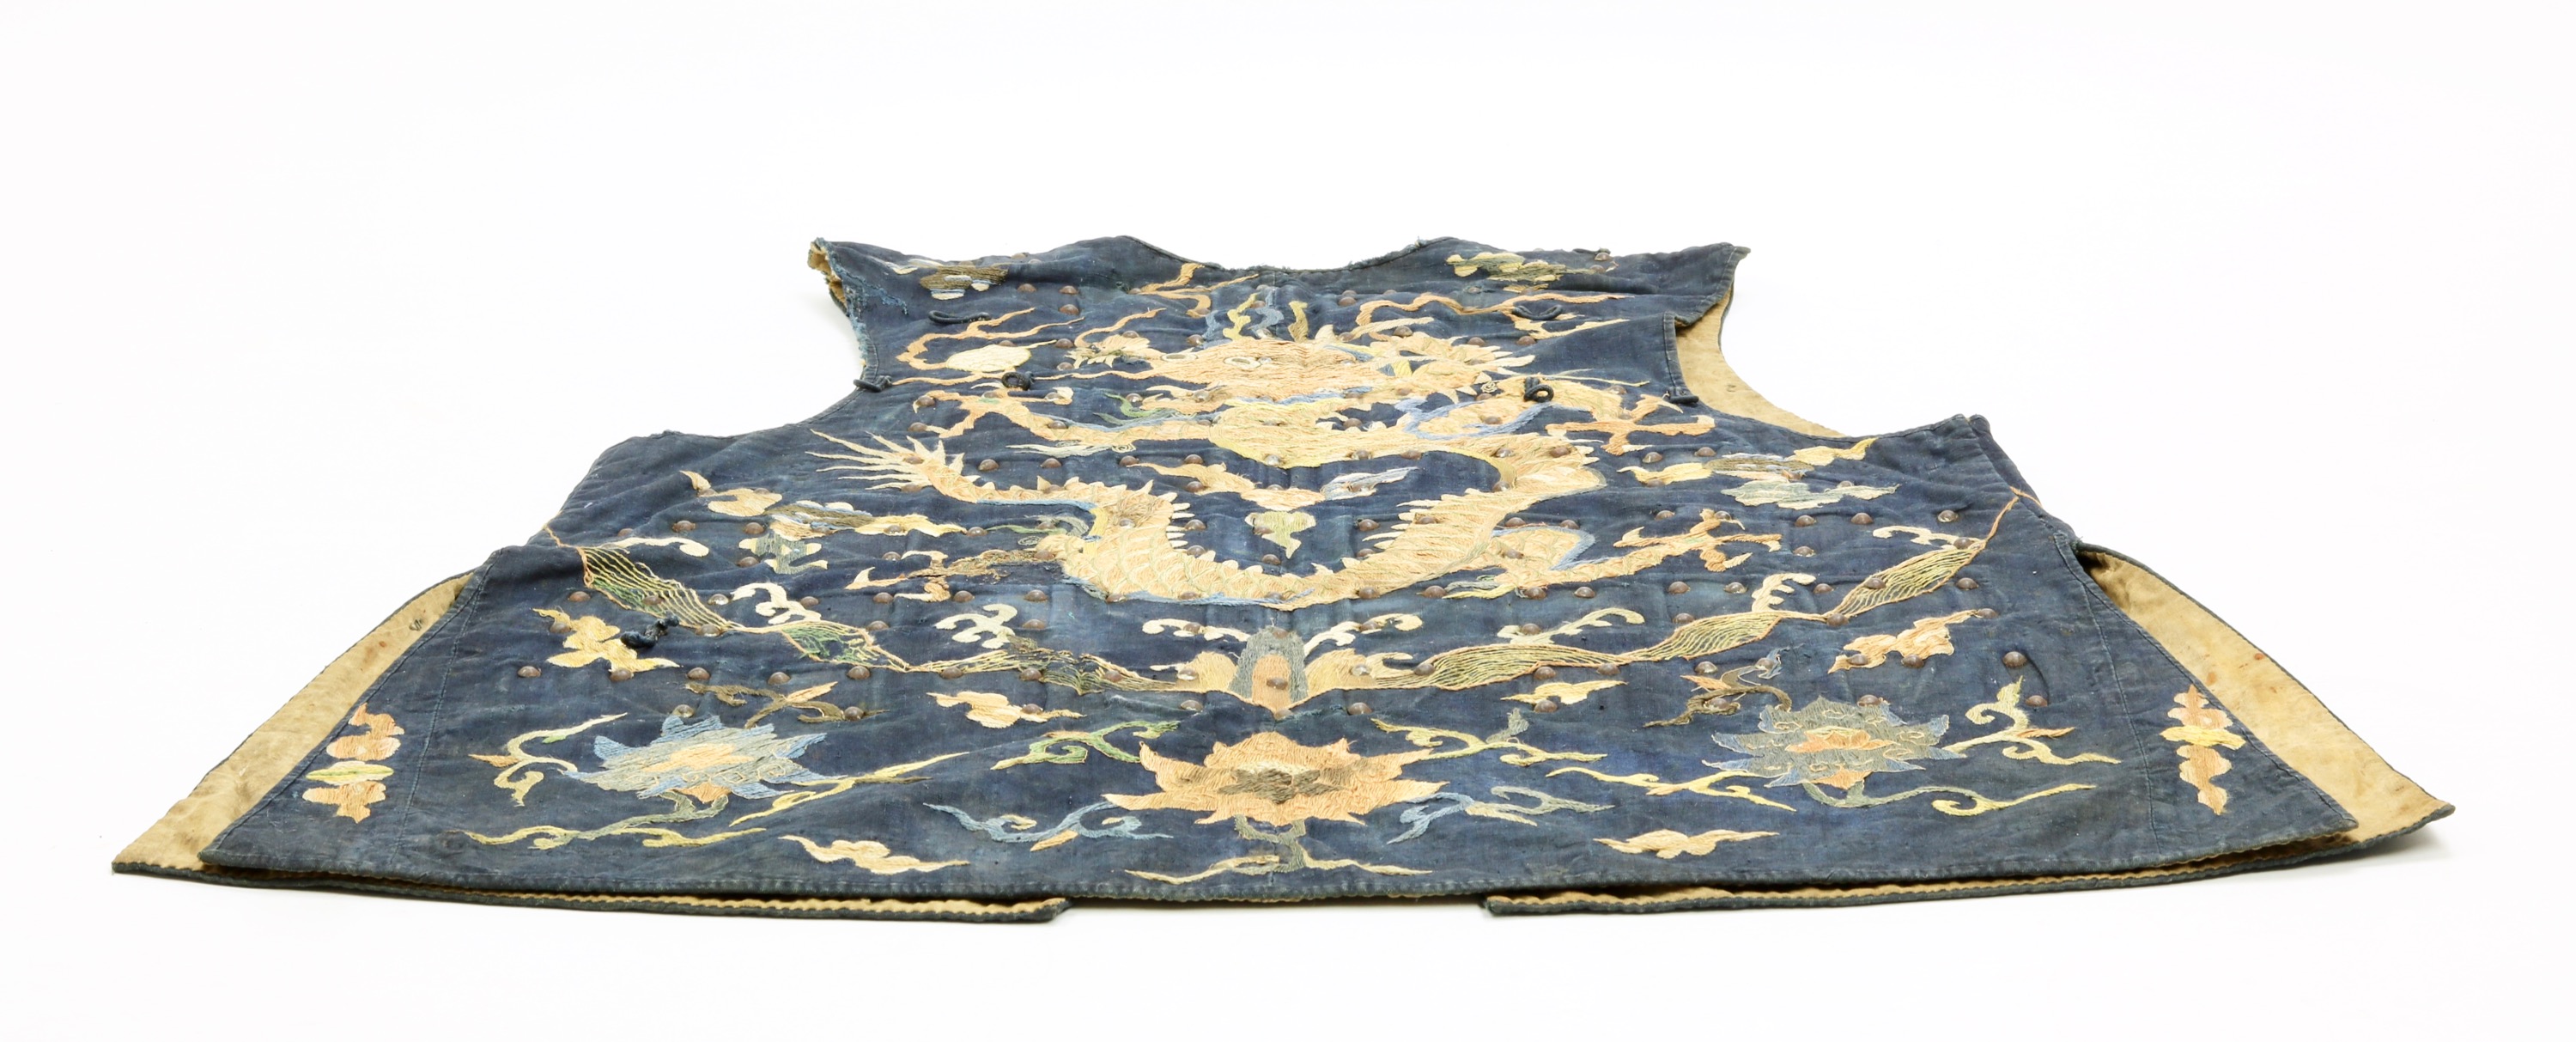 An early armored dingjia vest of the Ming-Qing transition period